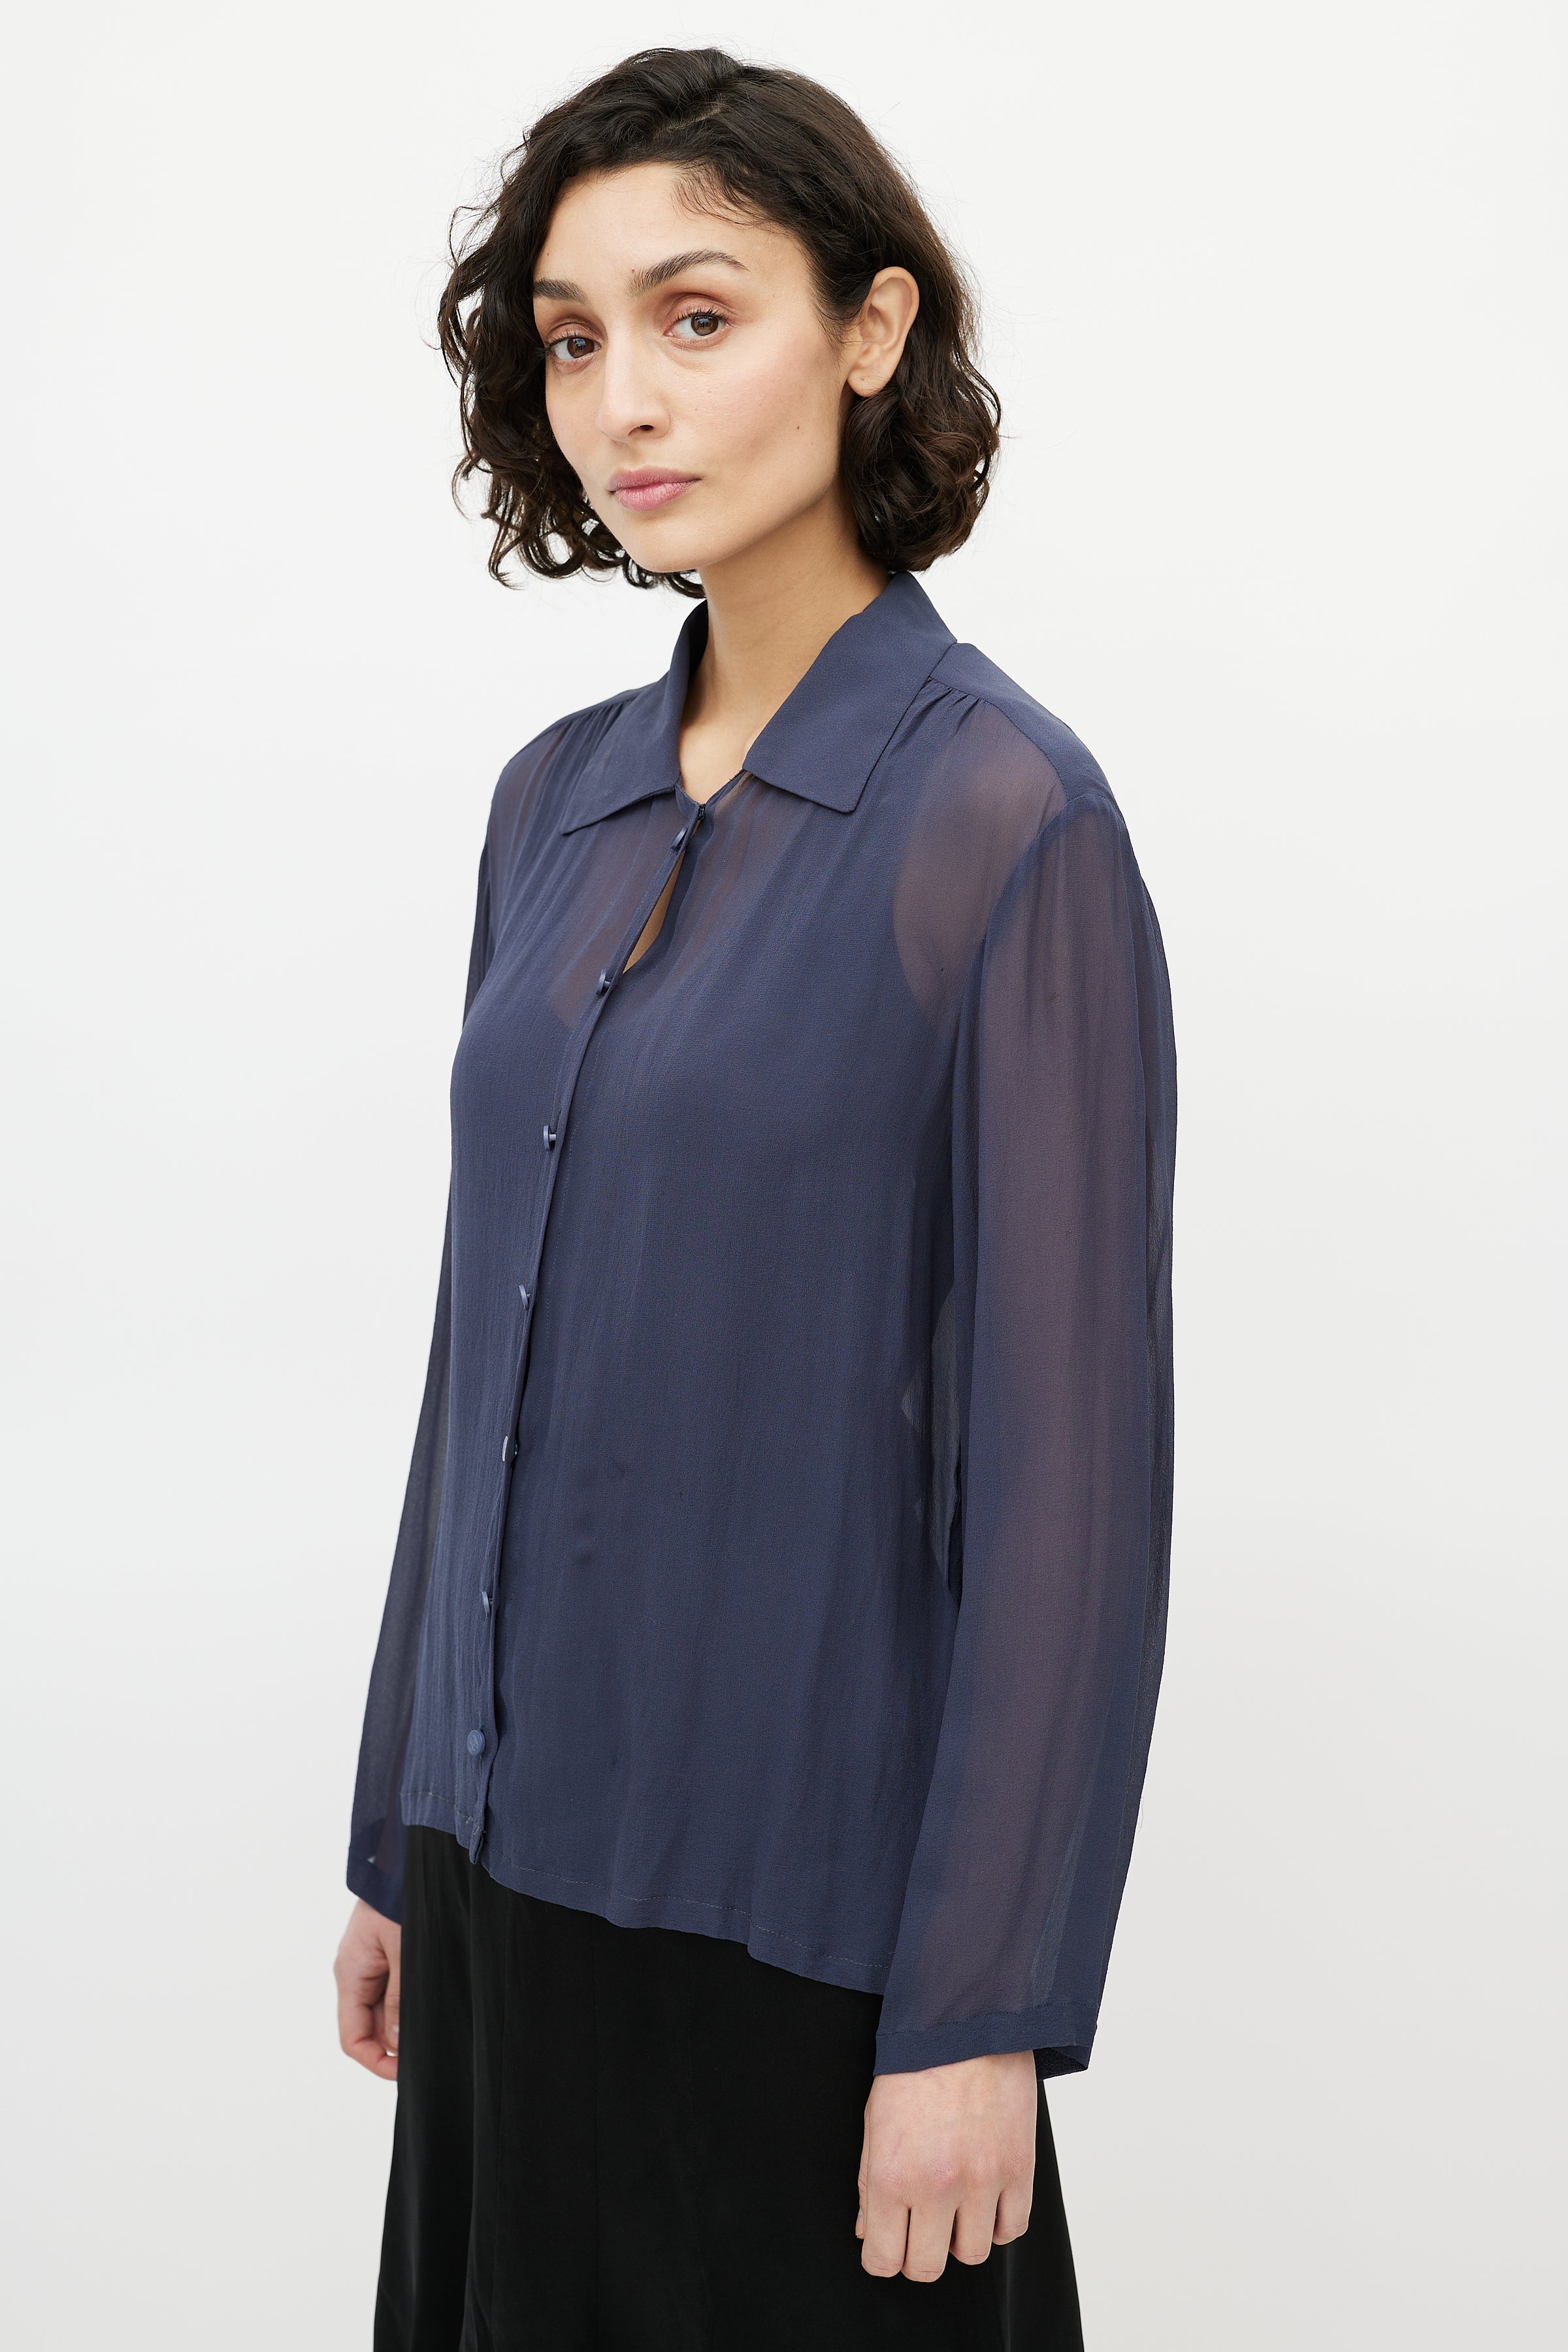 Chanel // Sheer Consignment – VSP Navy Scarf Blouse